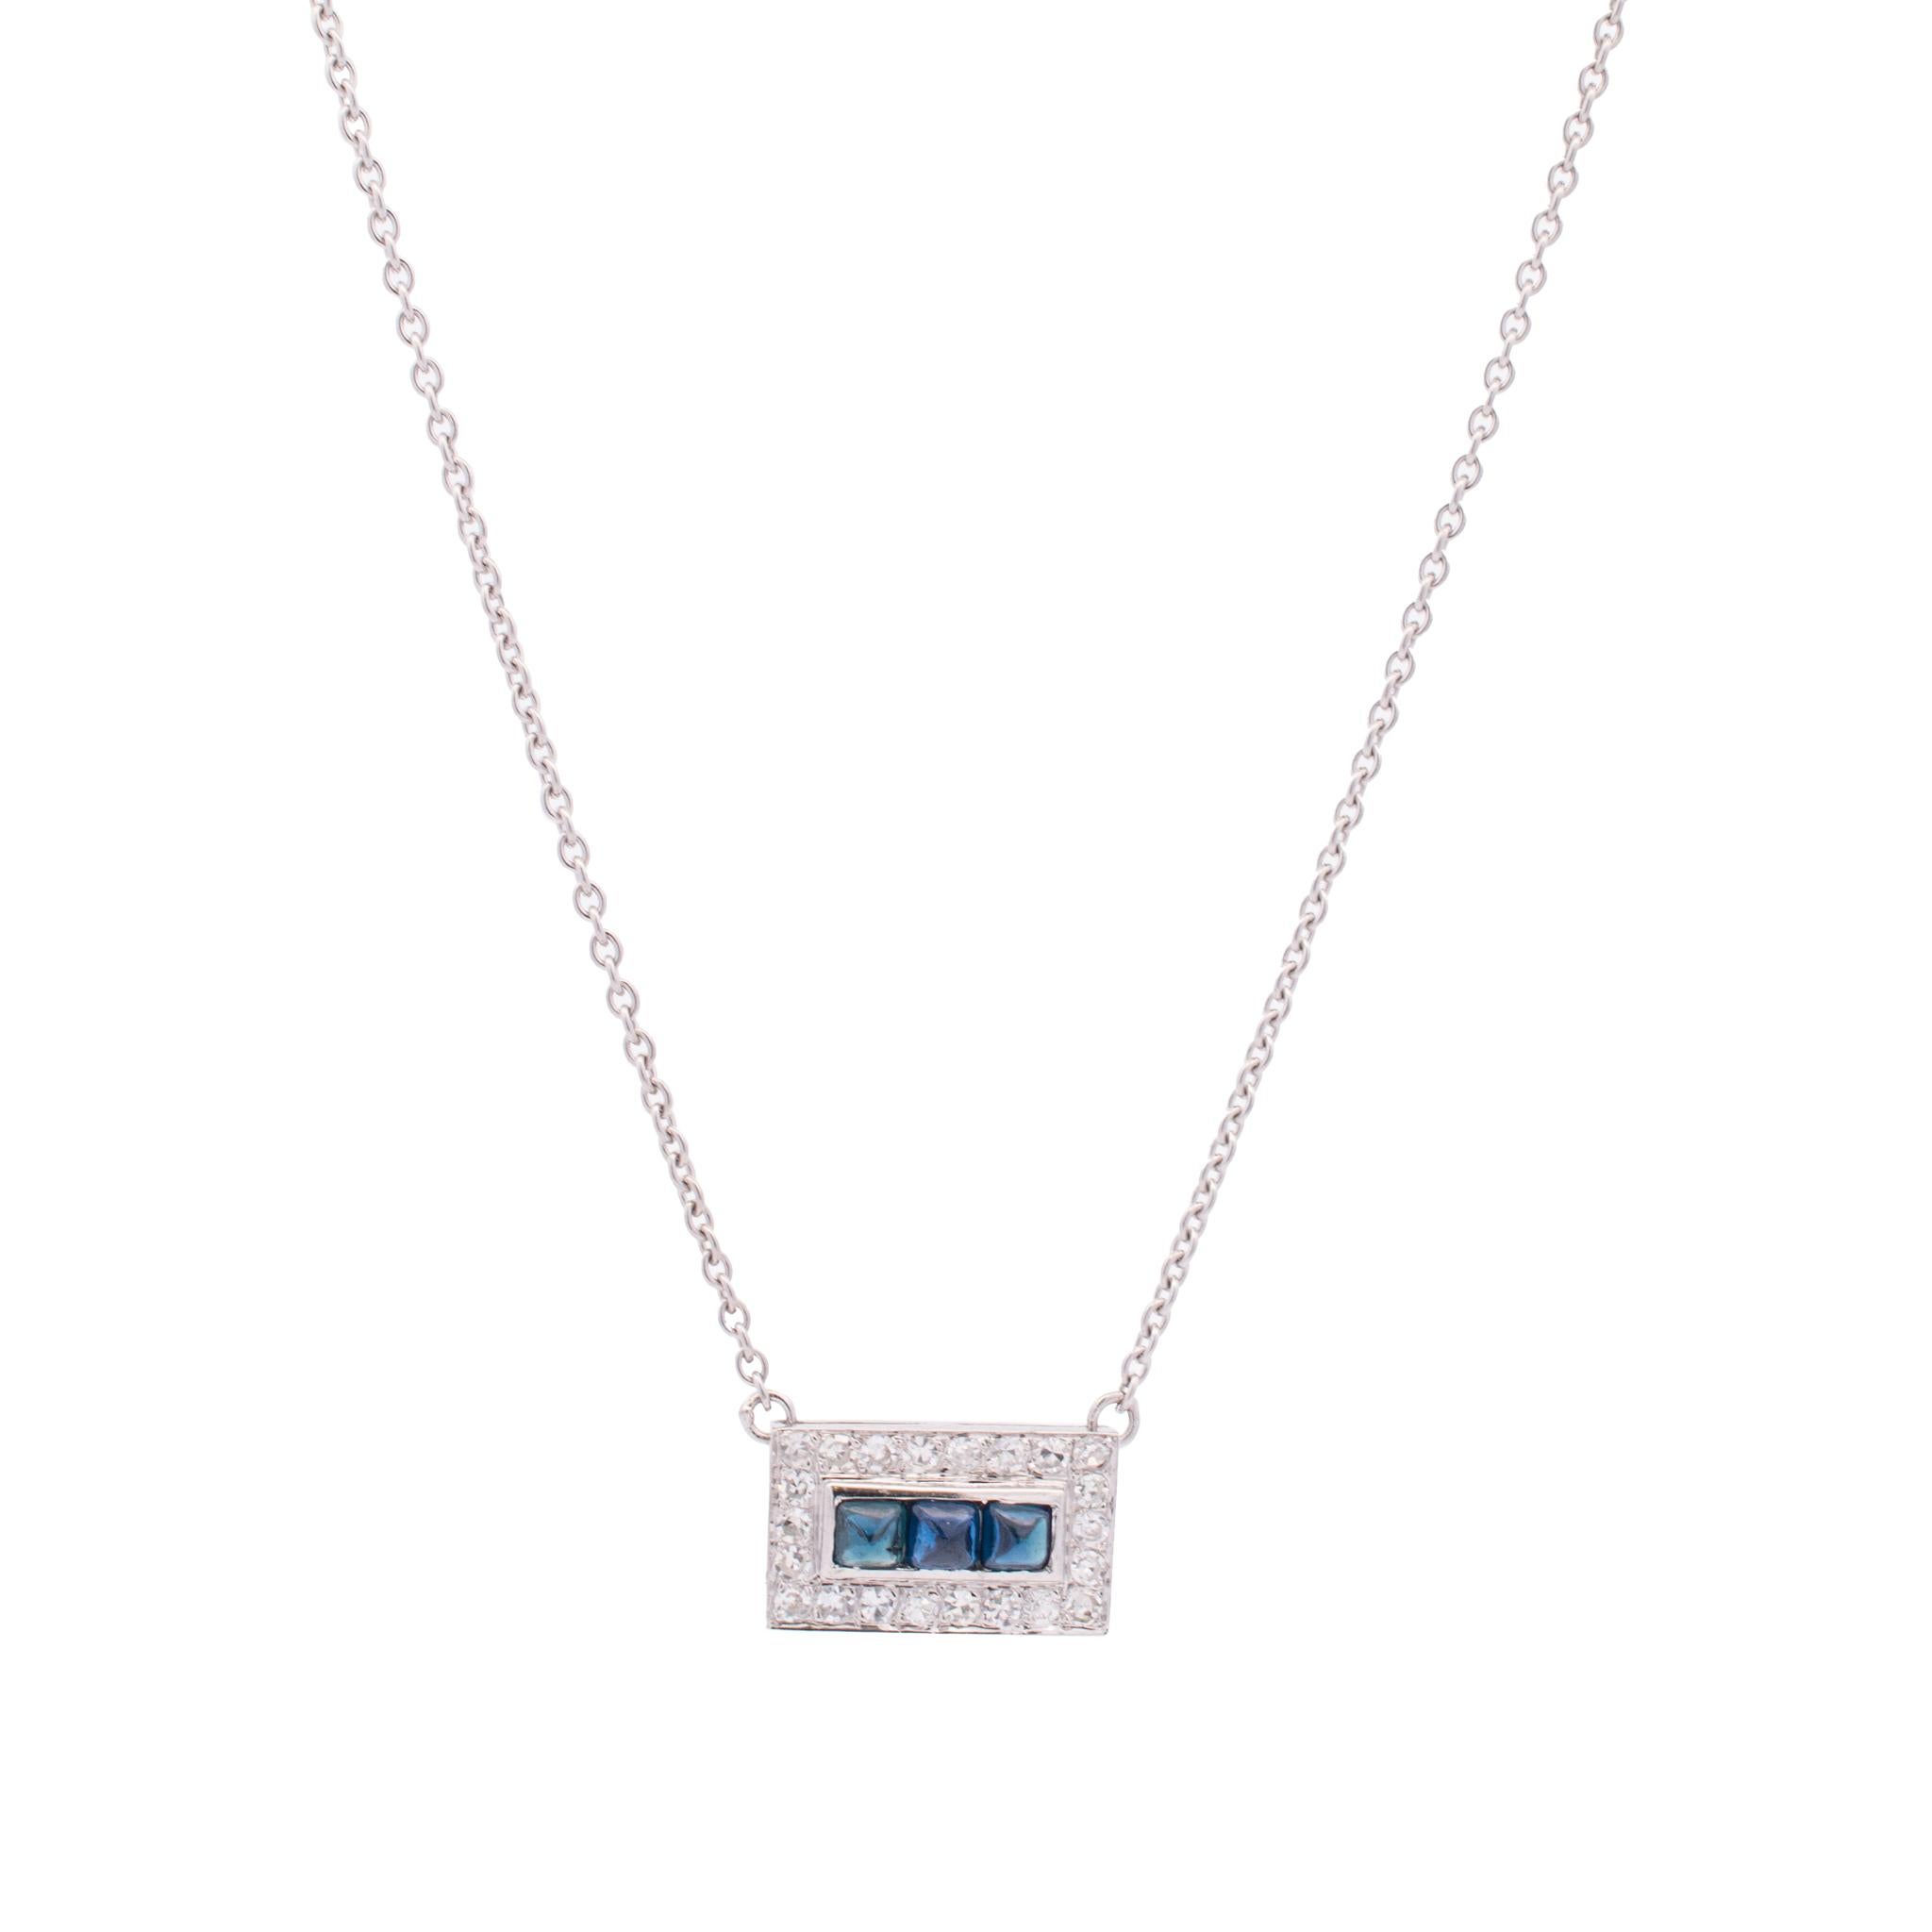 Gender: Ladies

Metal Type: 18K White Gold

Chain Length: 16.00 inches

Chain Width: 1.30mm

Pendant Width: 13.75mm

Weight: 4.32 grams

Ladies 18K white gold single strand choker diamond and sapphire necklace. Engraved with 